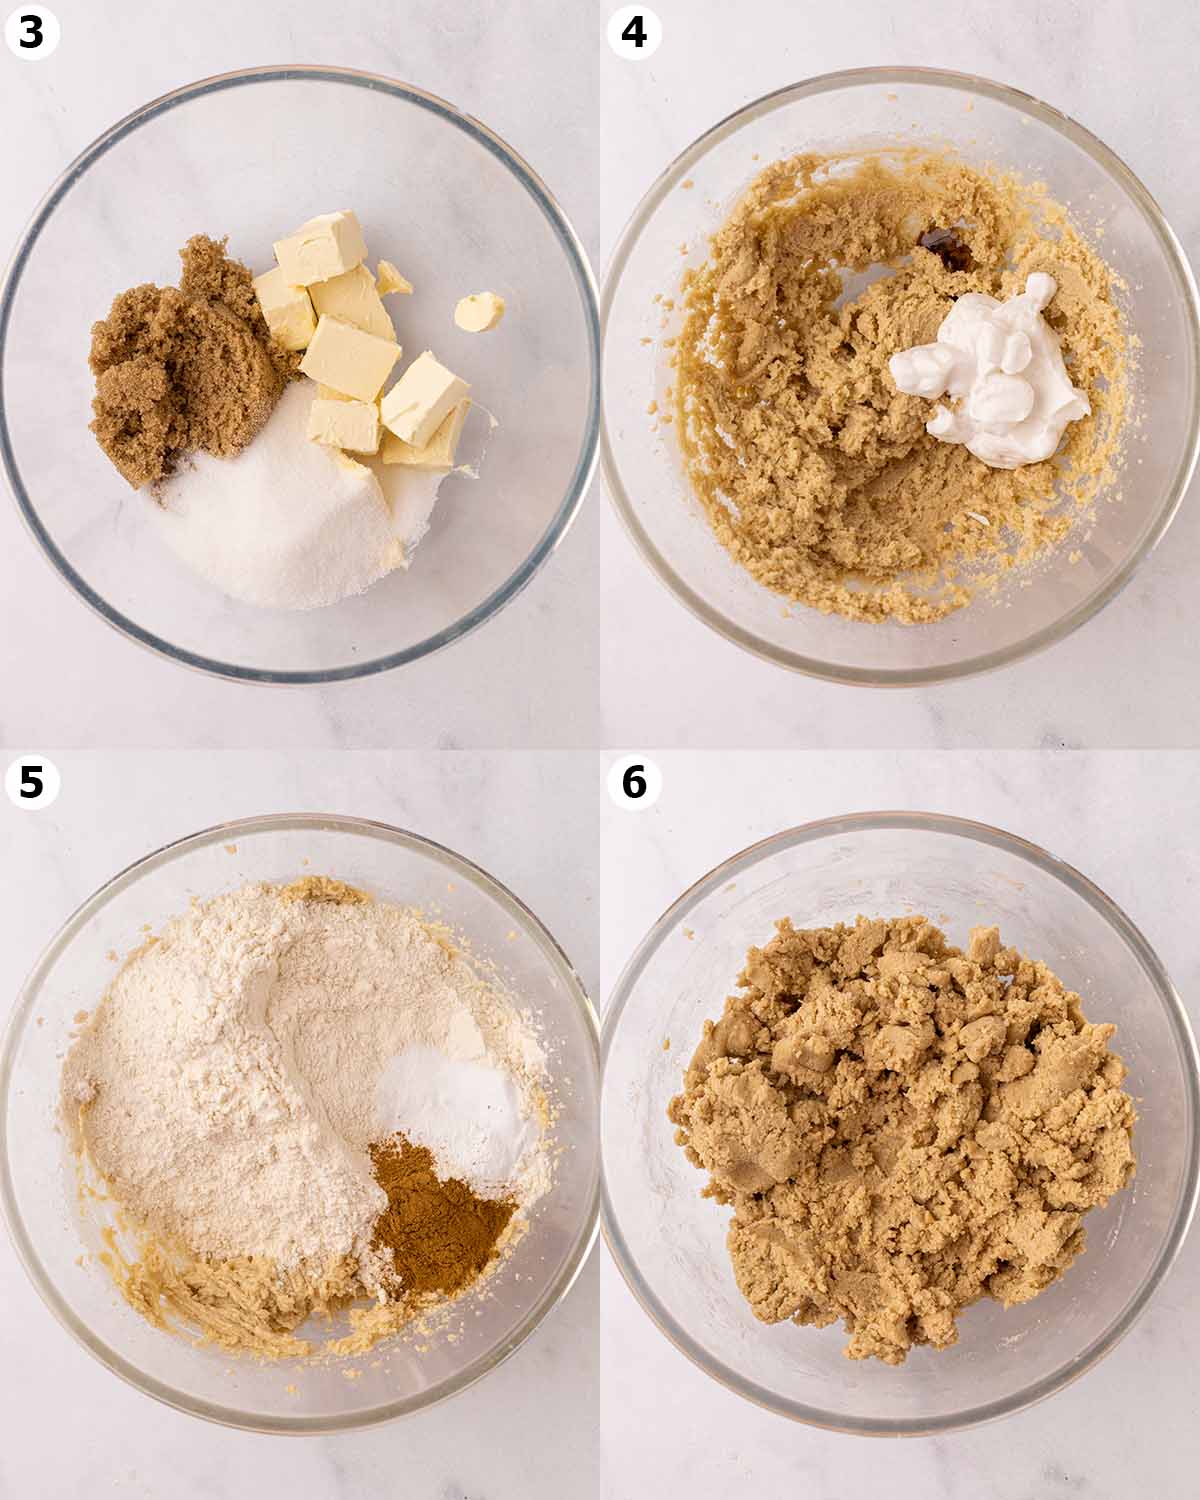 Four image collage showing how to make the cookie dough, step-by-step.